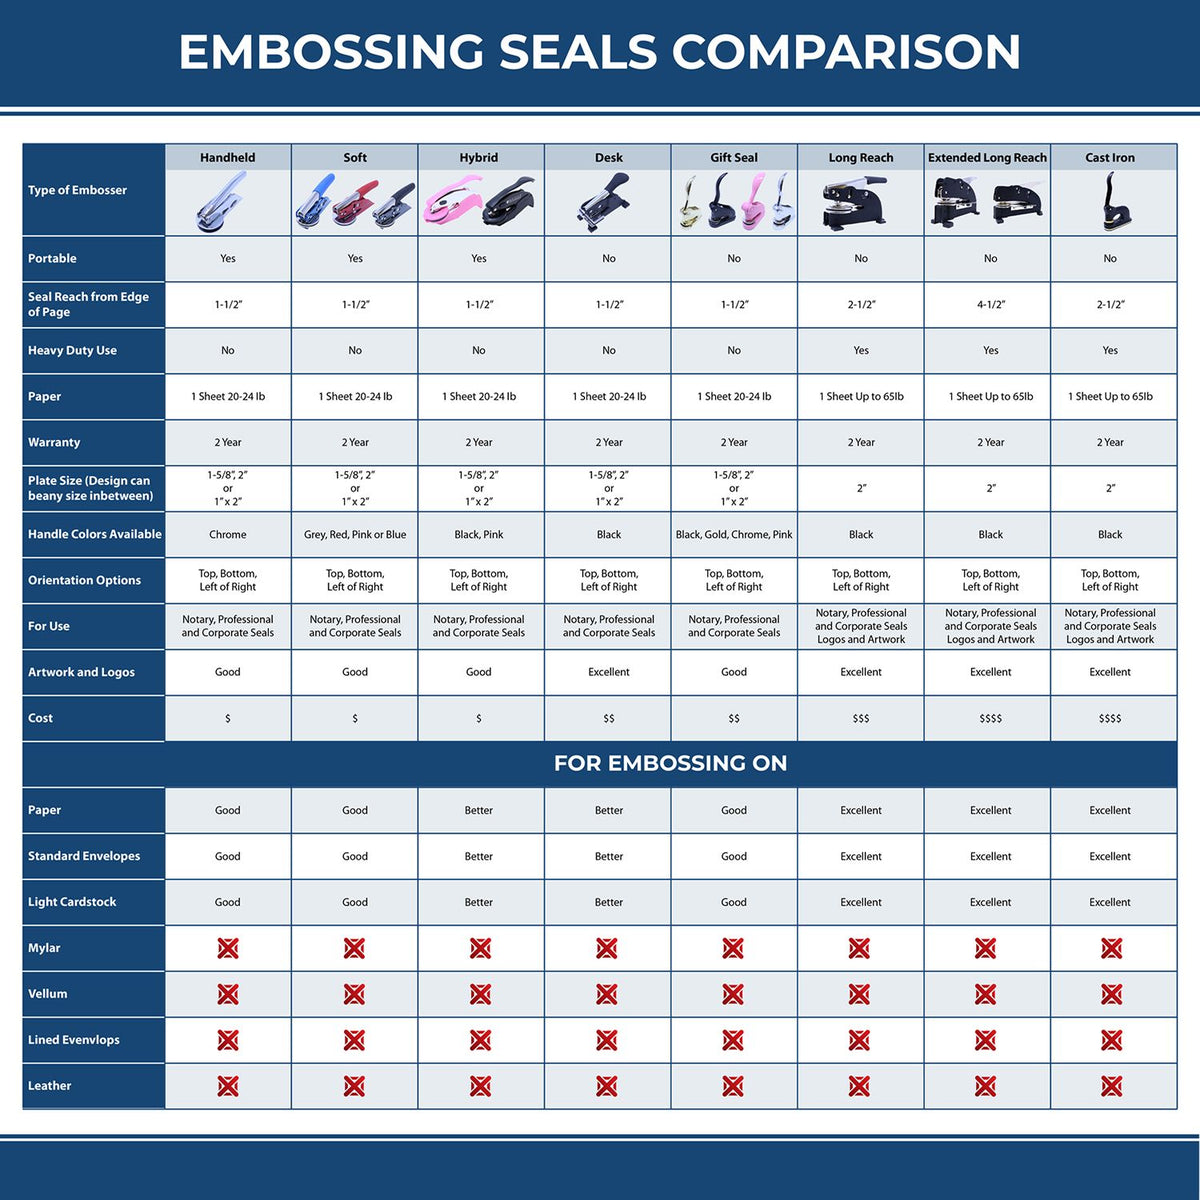 A comparison chart for the different types of mount models available for the Hybrid Georgia Land Surveyor Seal